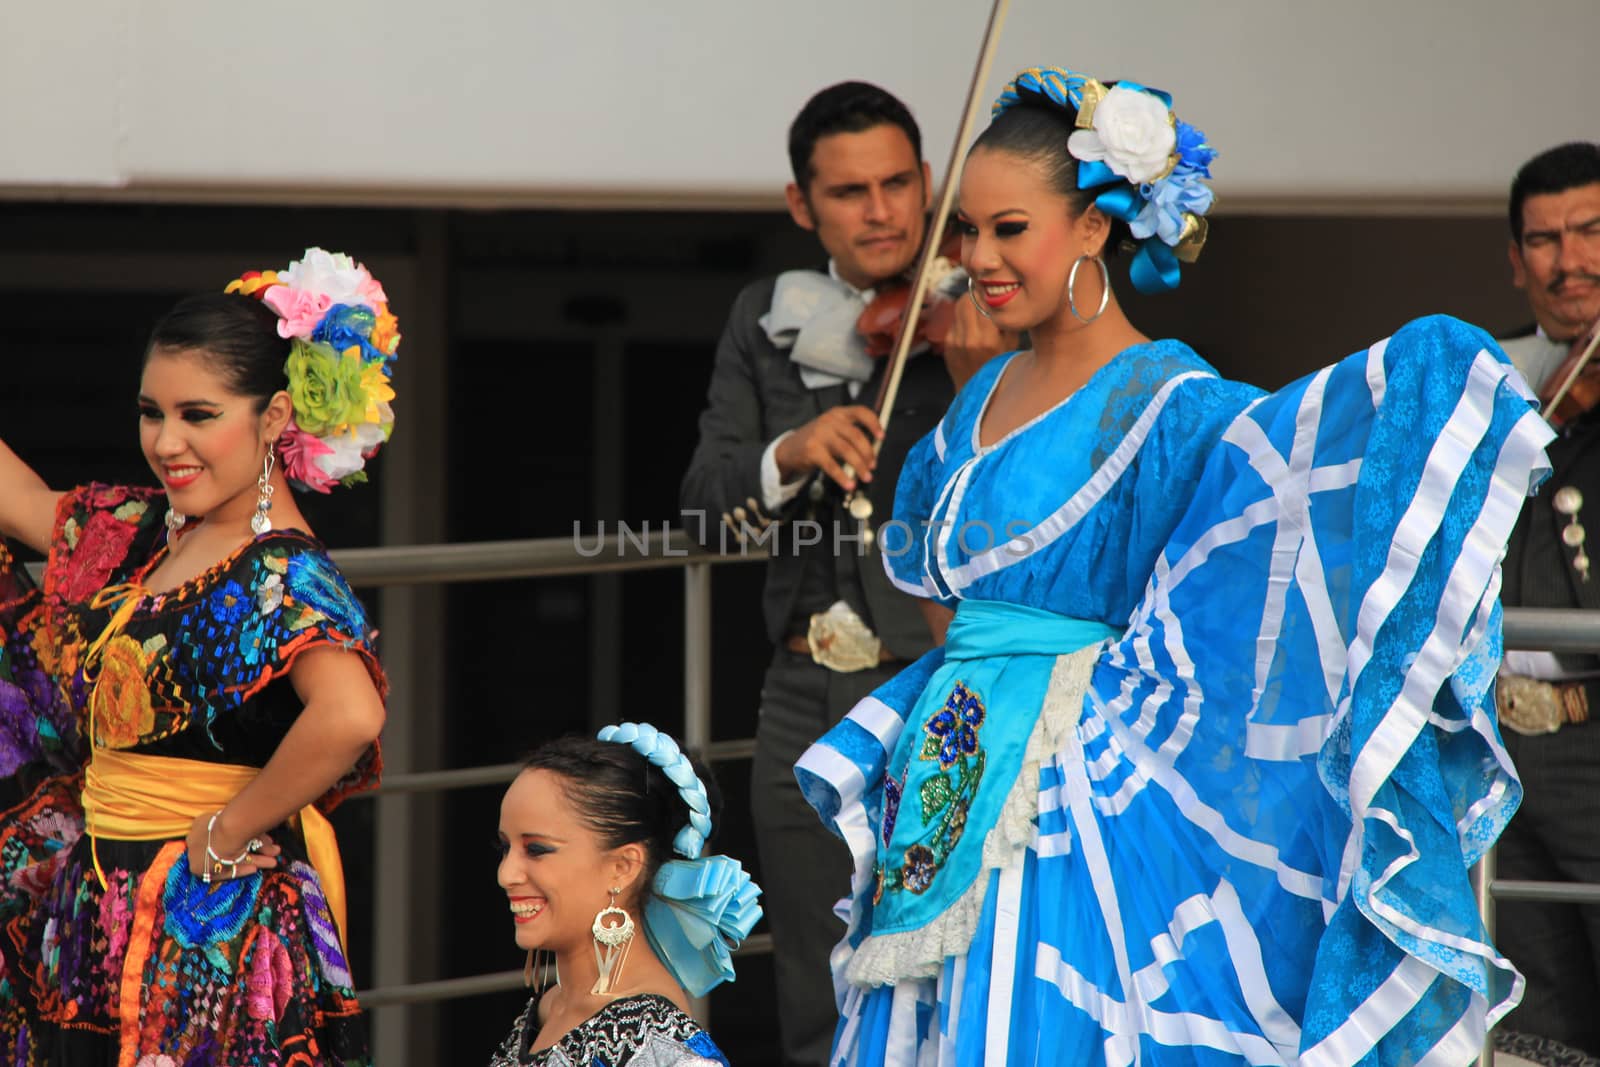 Mexican dancers performing on stage in Puerto Vallarta, Mexico
07 Dec 2012
No model release
Editorial only